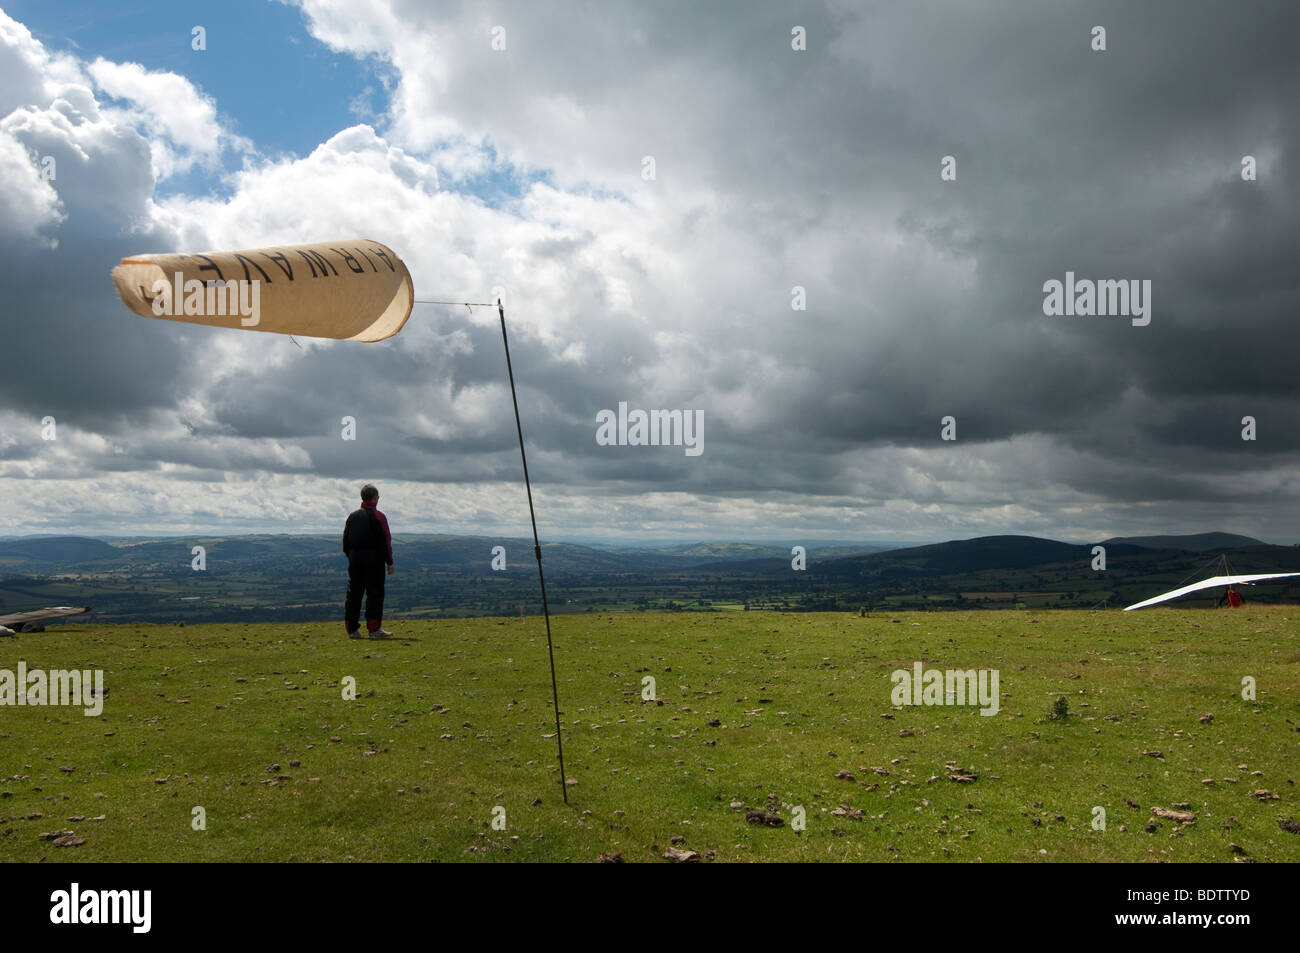 wind sock on hill with hang gliders Stock Photo